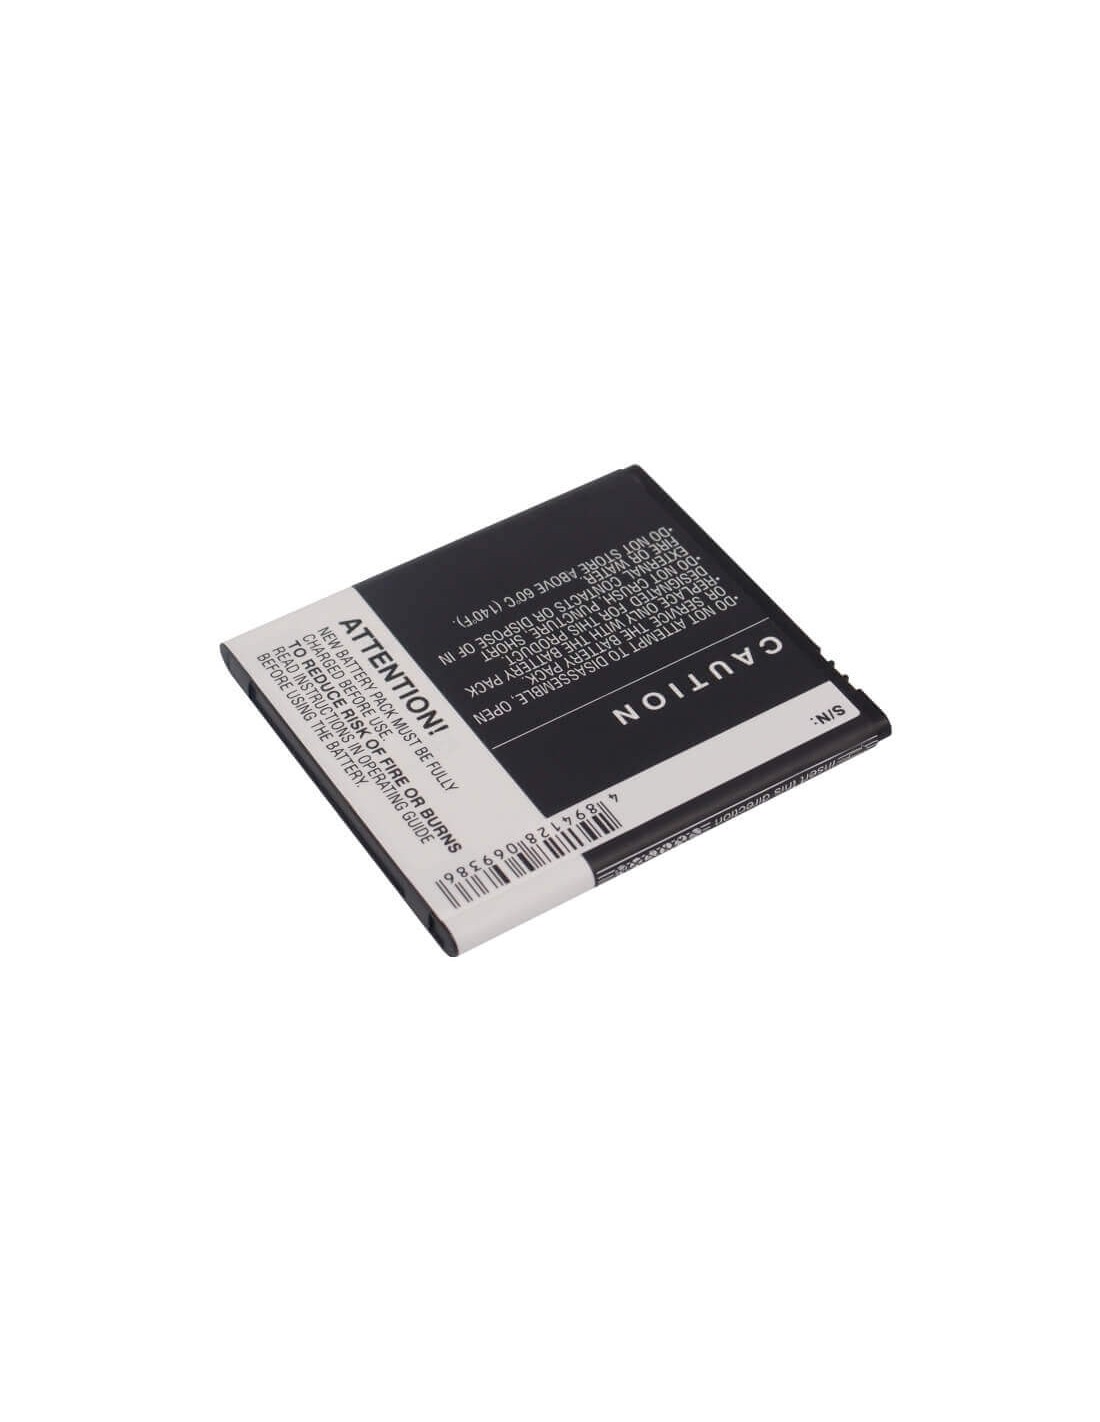 Battery for Alcatel OT-986, AK47, One Touch 986 3.7V, 1800mAh - 6.66Wh